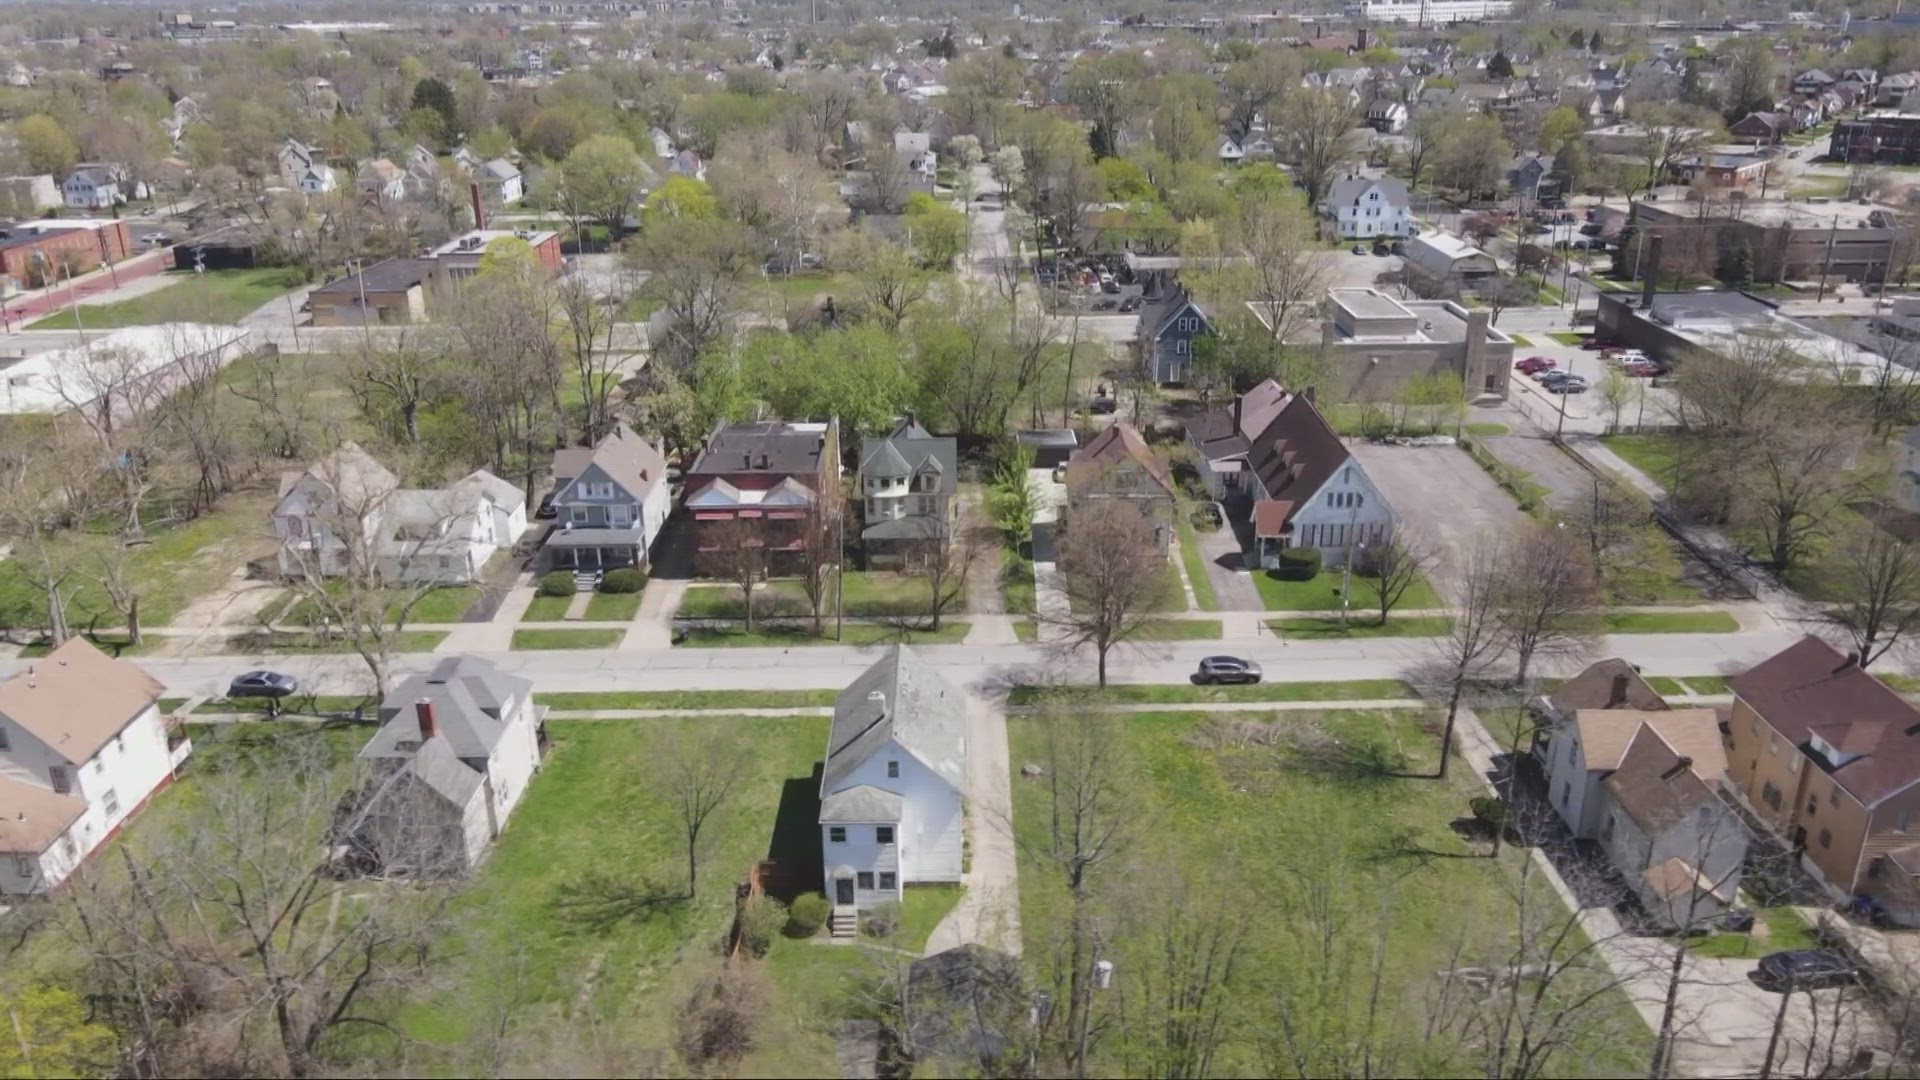 Cleveland officials & surveyors have been inspecting properties in neighborhoods across the city. The goal is to how to divvy up money from the American Rescue Plan.